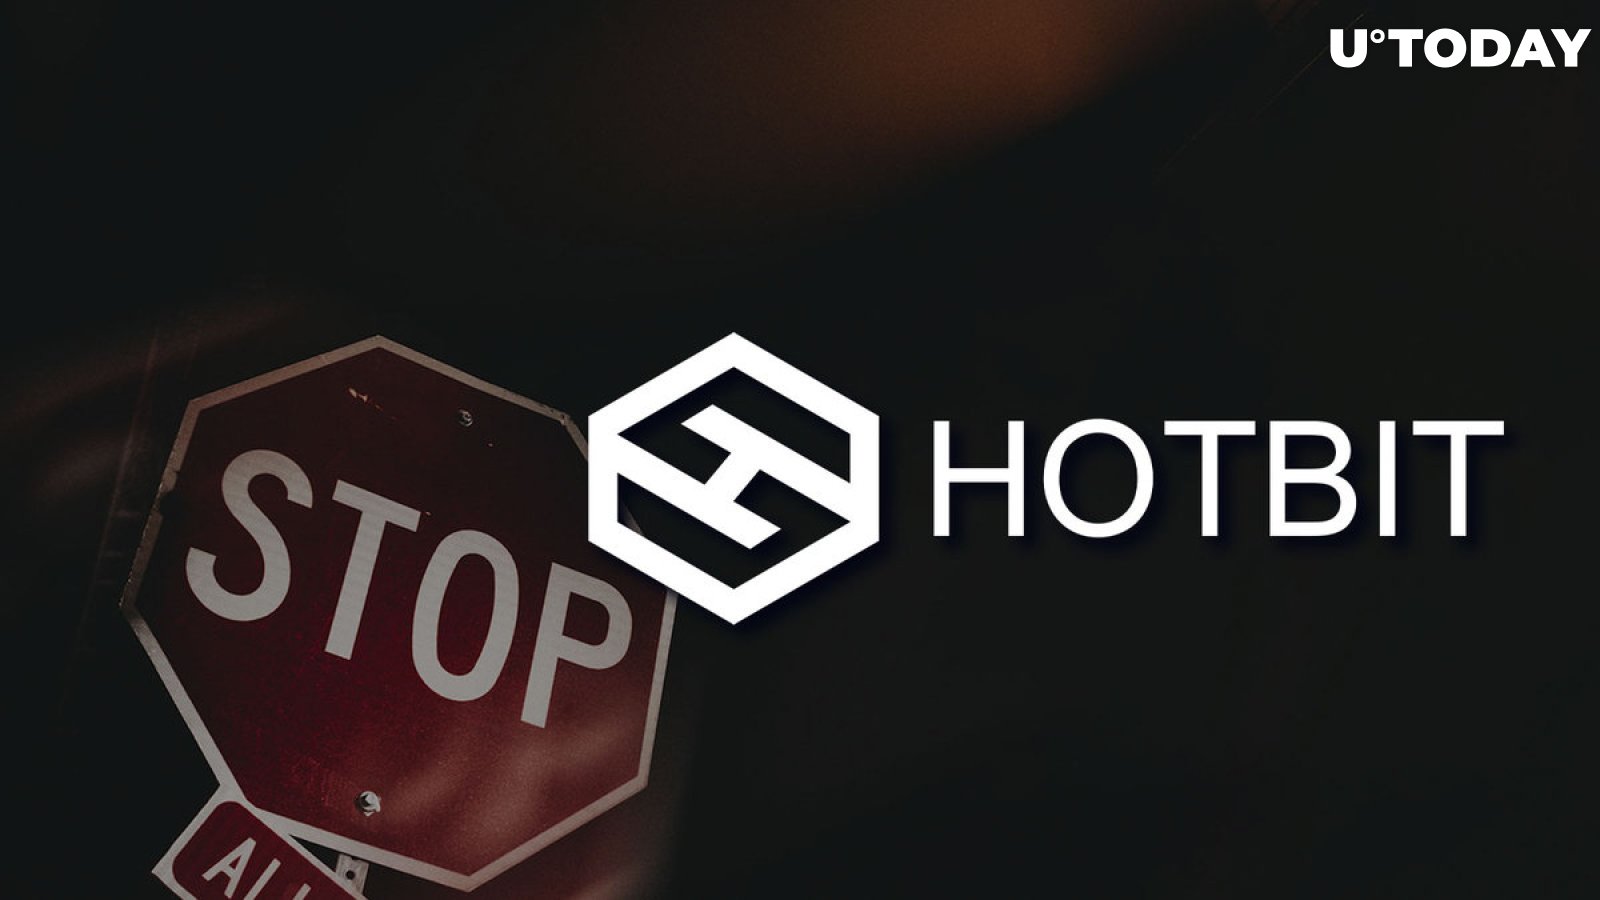 Hotbit Exchange Suspends Operations, Customers Have 30 Days to Withdraw Funds